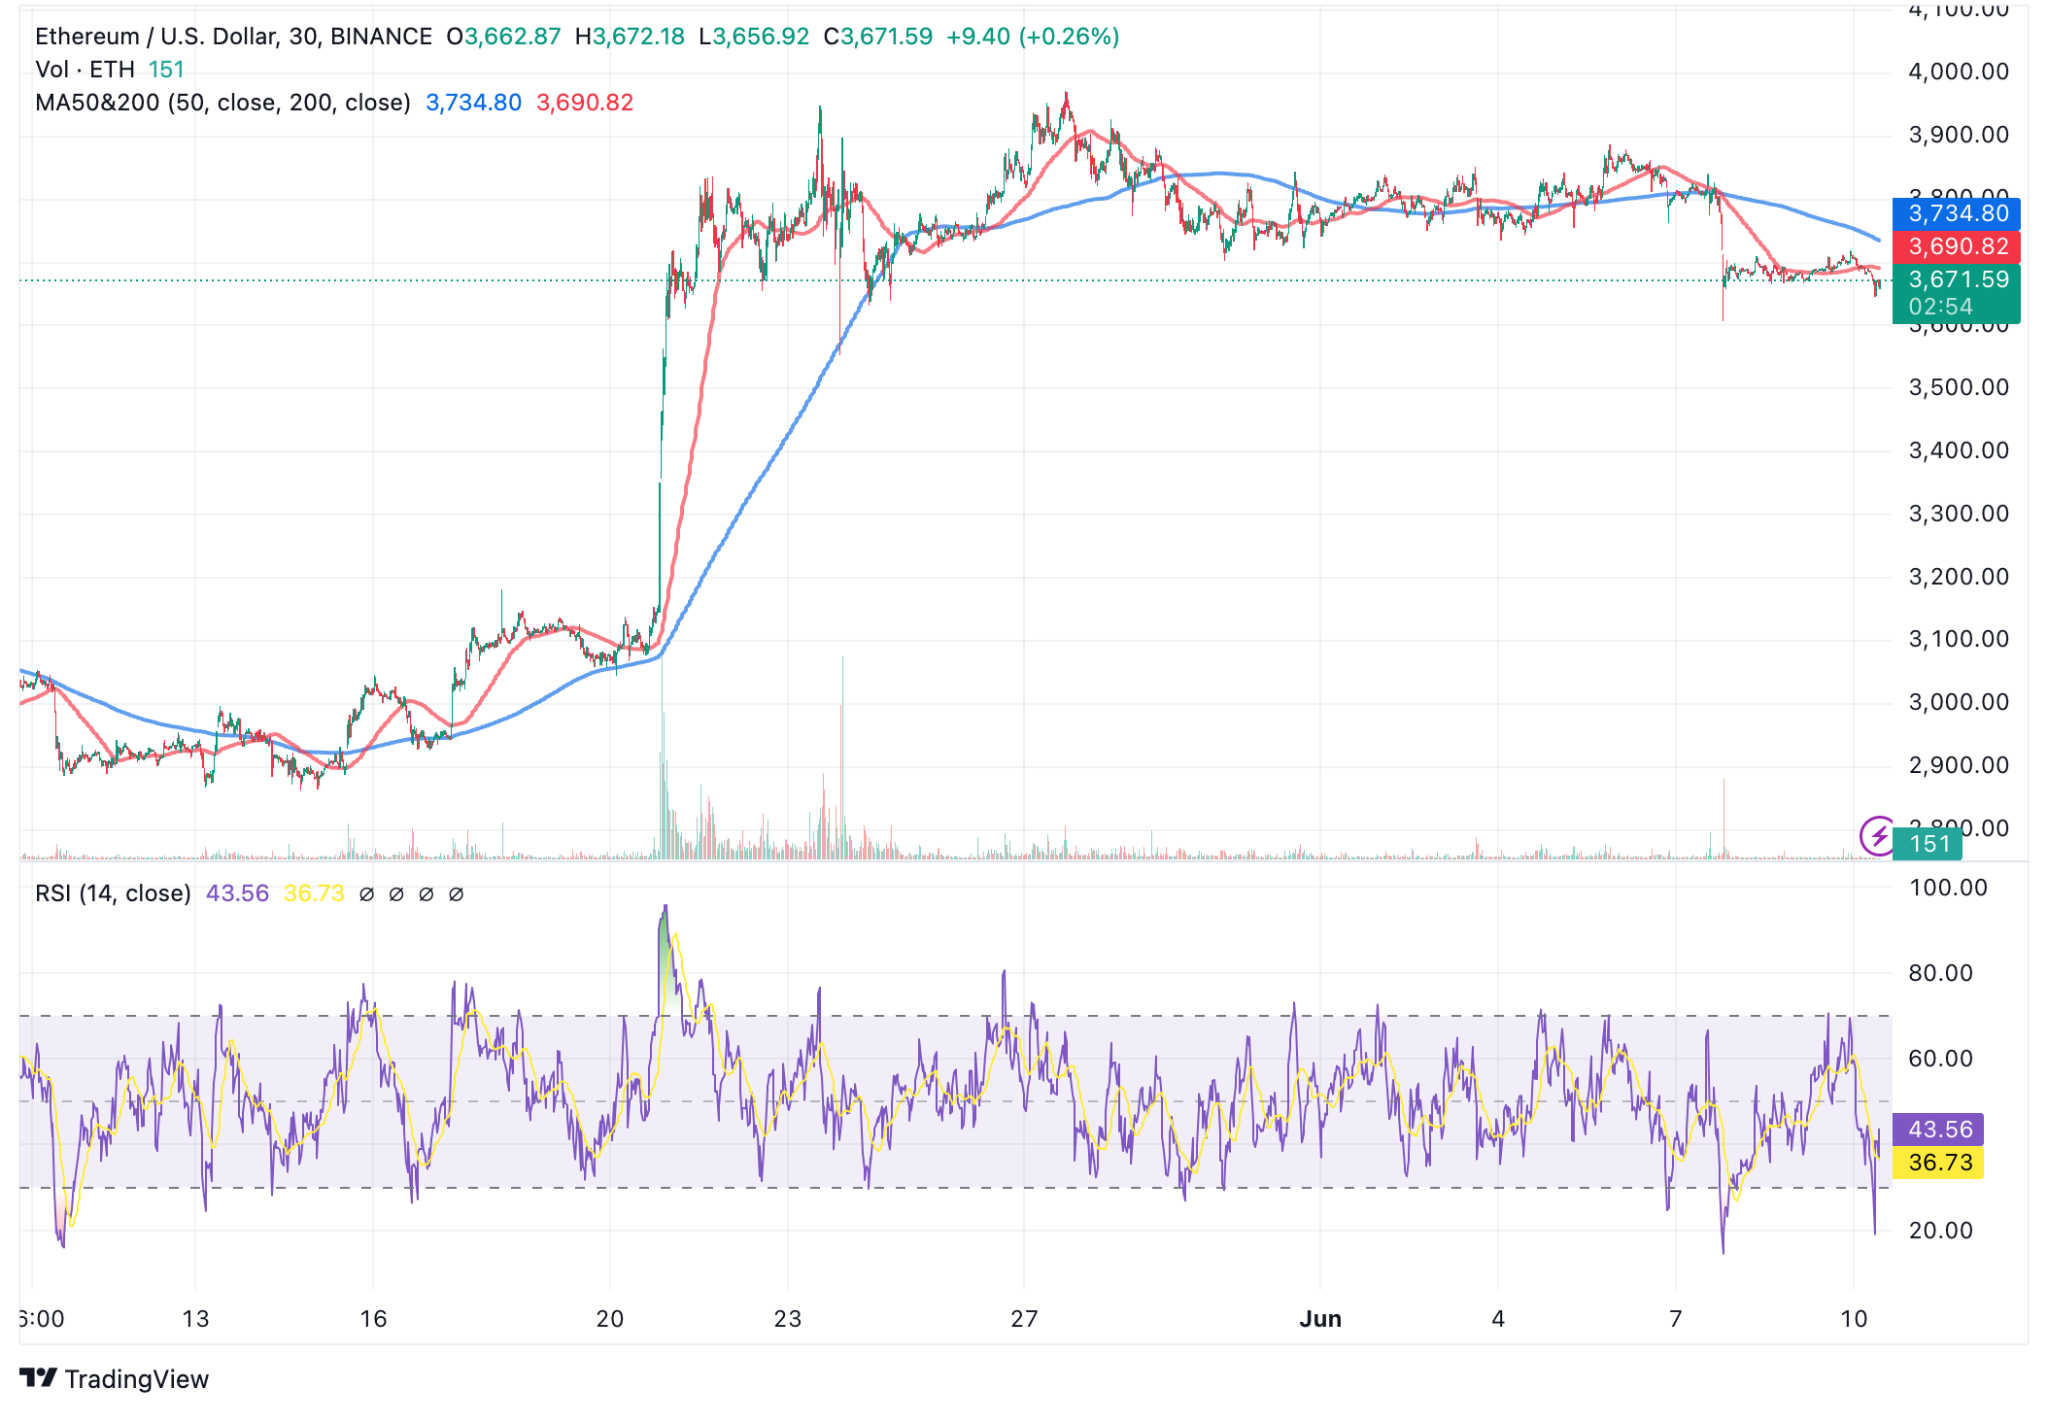 Ethereum’s price is below both the 50-period and the 200-period moving averages, trending downward